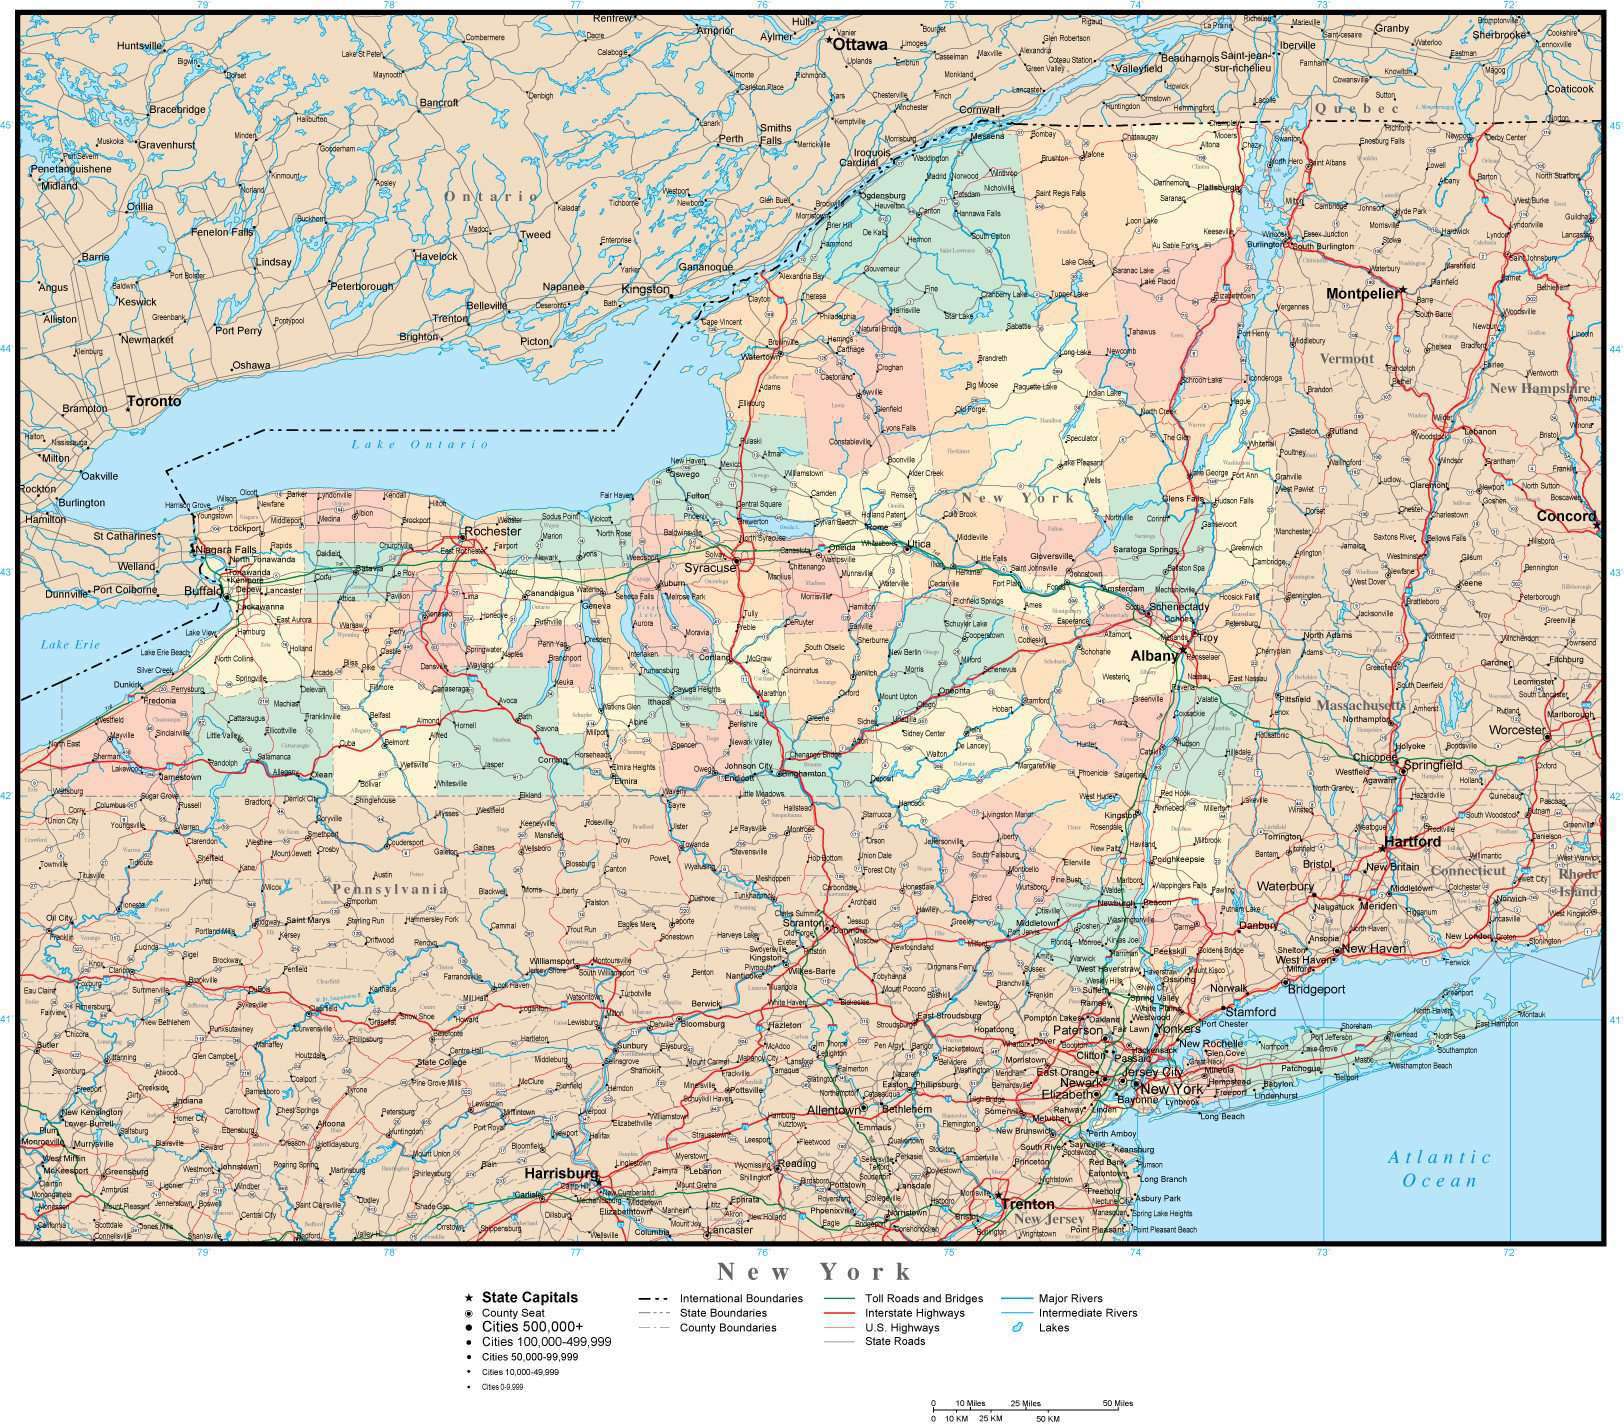 New York Adobe Illustrator Map with Counties, Cities, County Seats